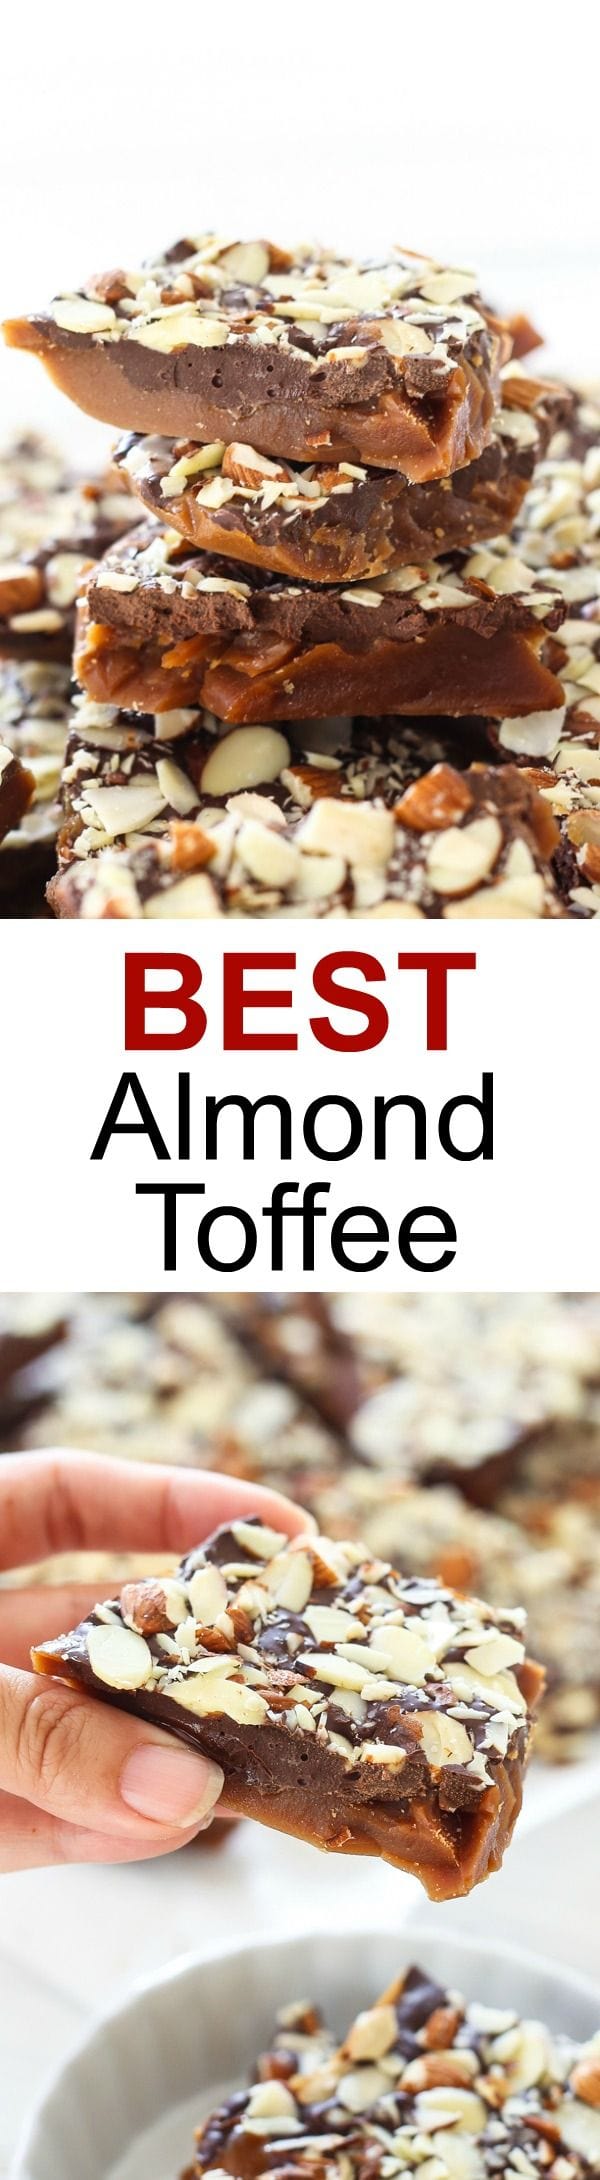 Almond Toffee – easy and the best homemade almond toffee recipe that is sweet, nutty, crunchy. Perfect candy for Christmas holidays | rasamalaysia.com